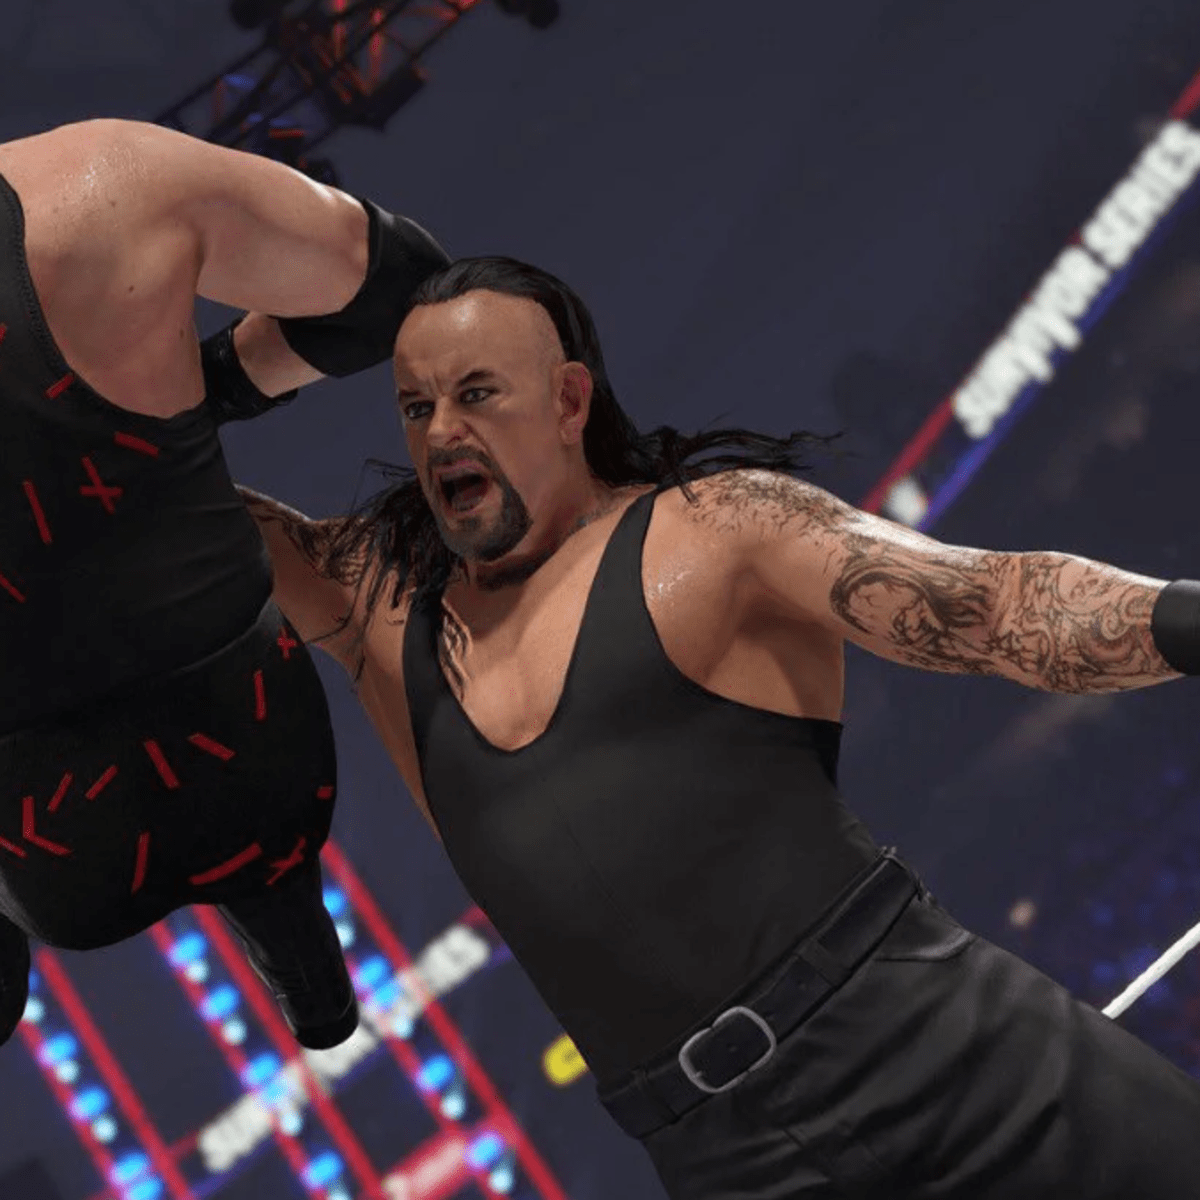 The Undertaker is No Longer the Highest-Ranked Character in a WWE